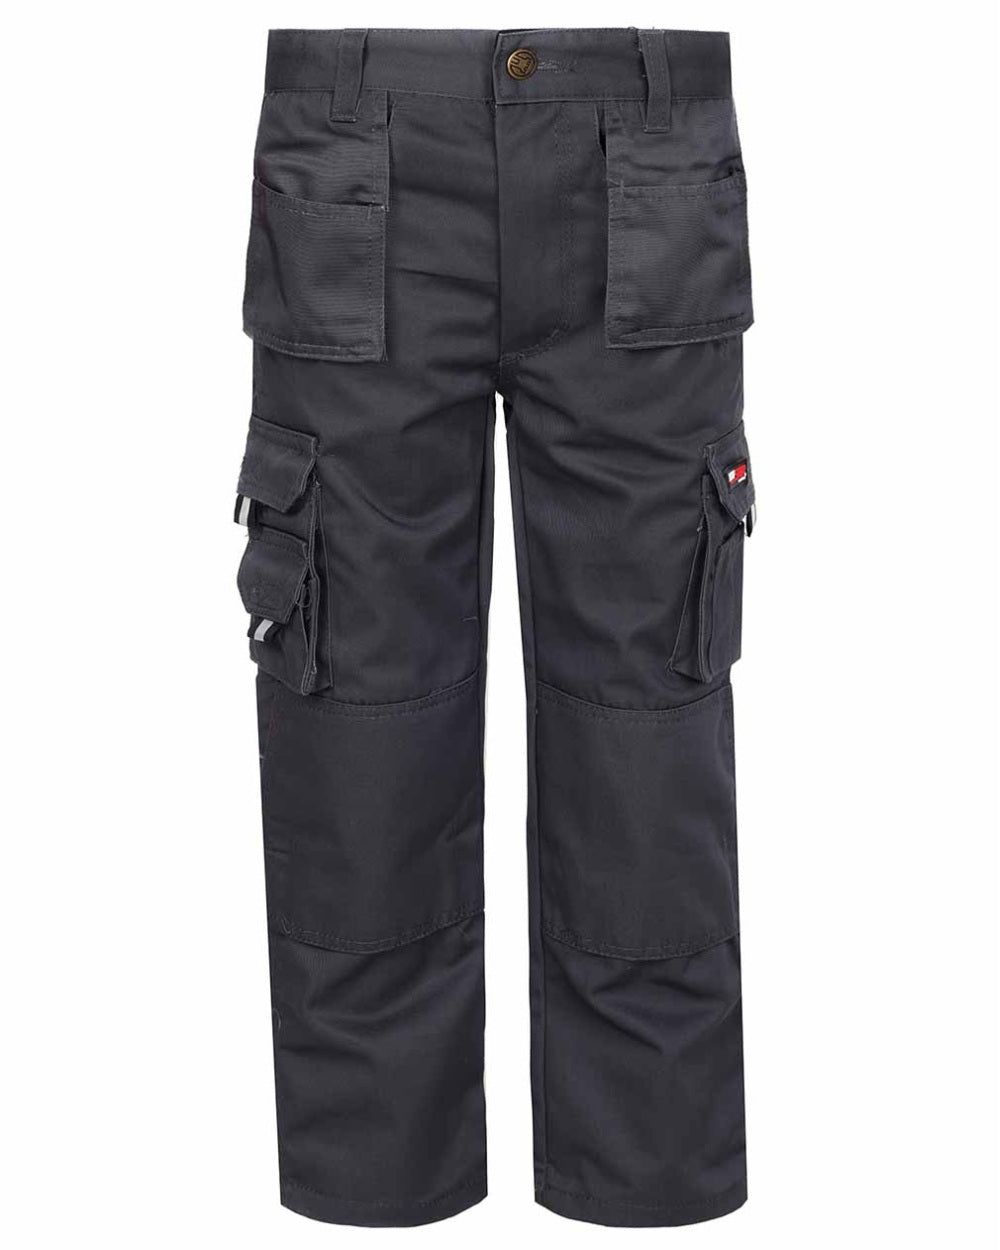 Grey Coloured TuffStuff Junior Pro Work Trousers On A White Background 